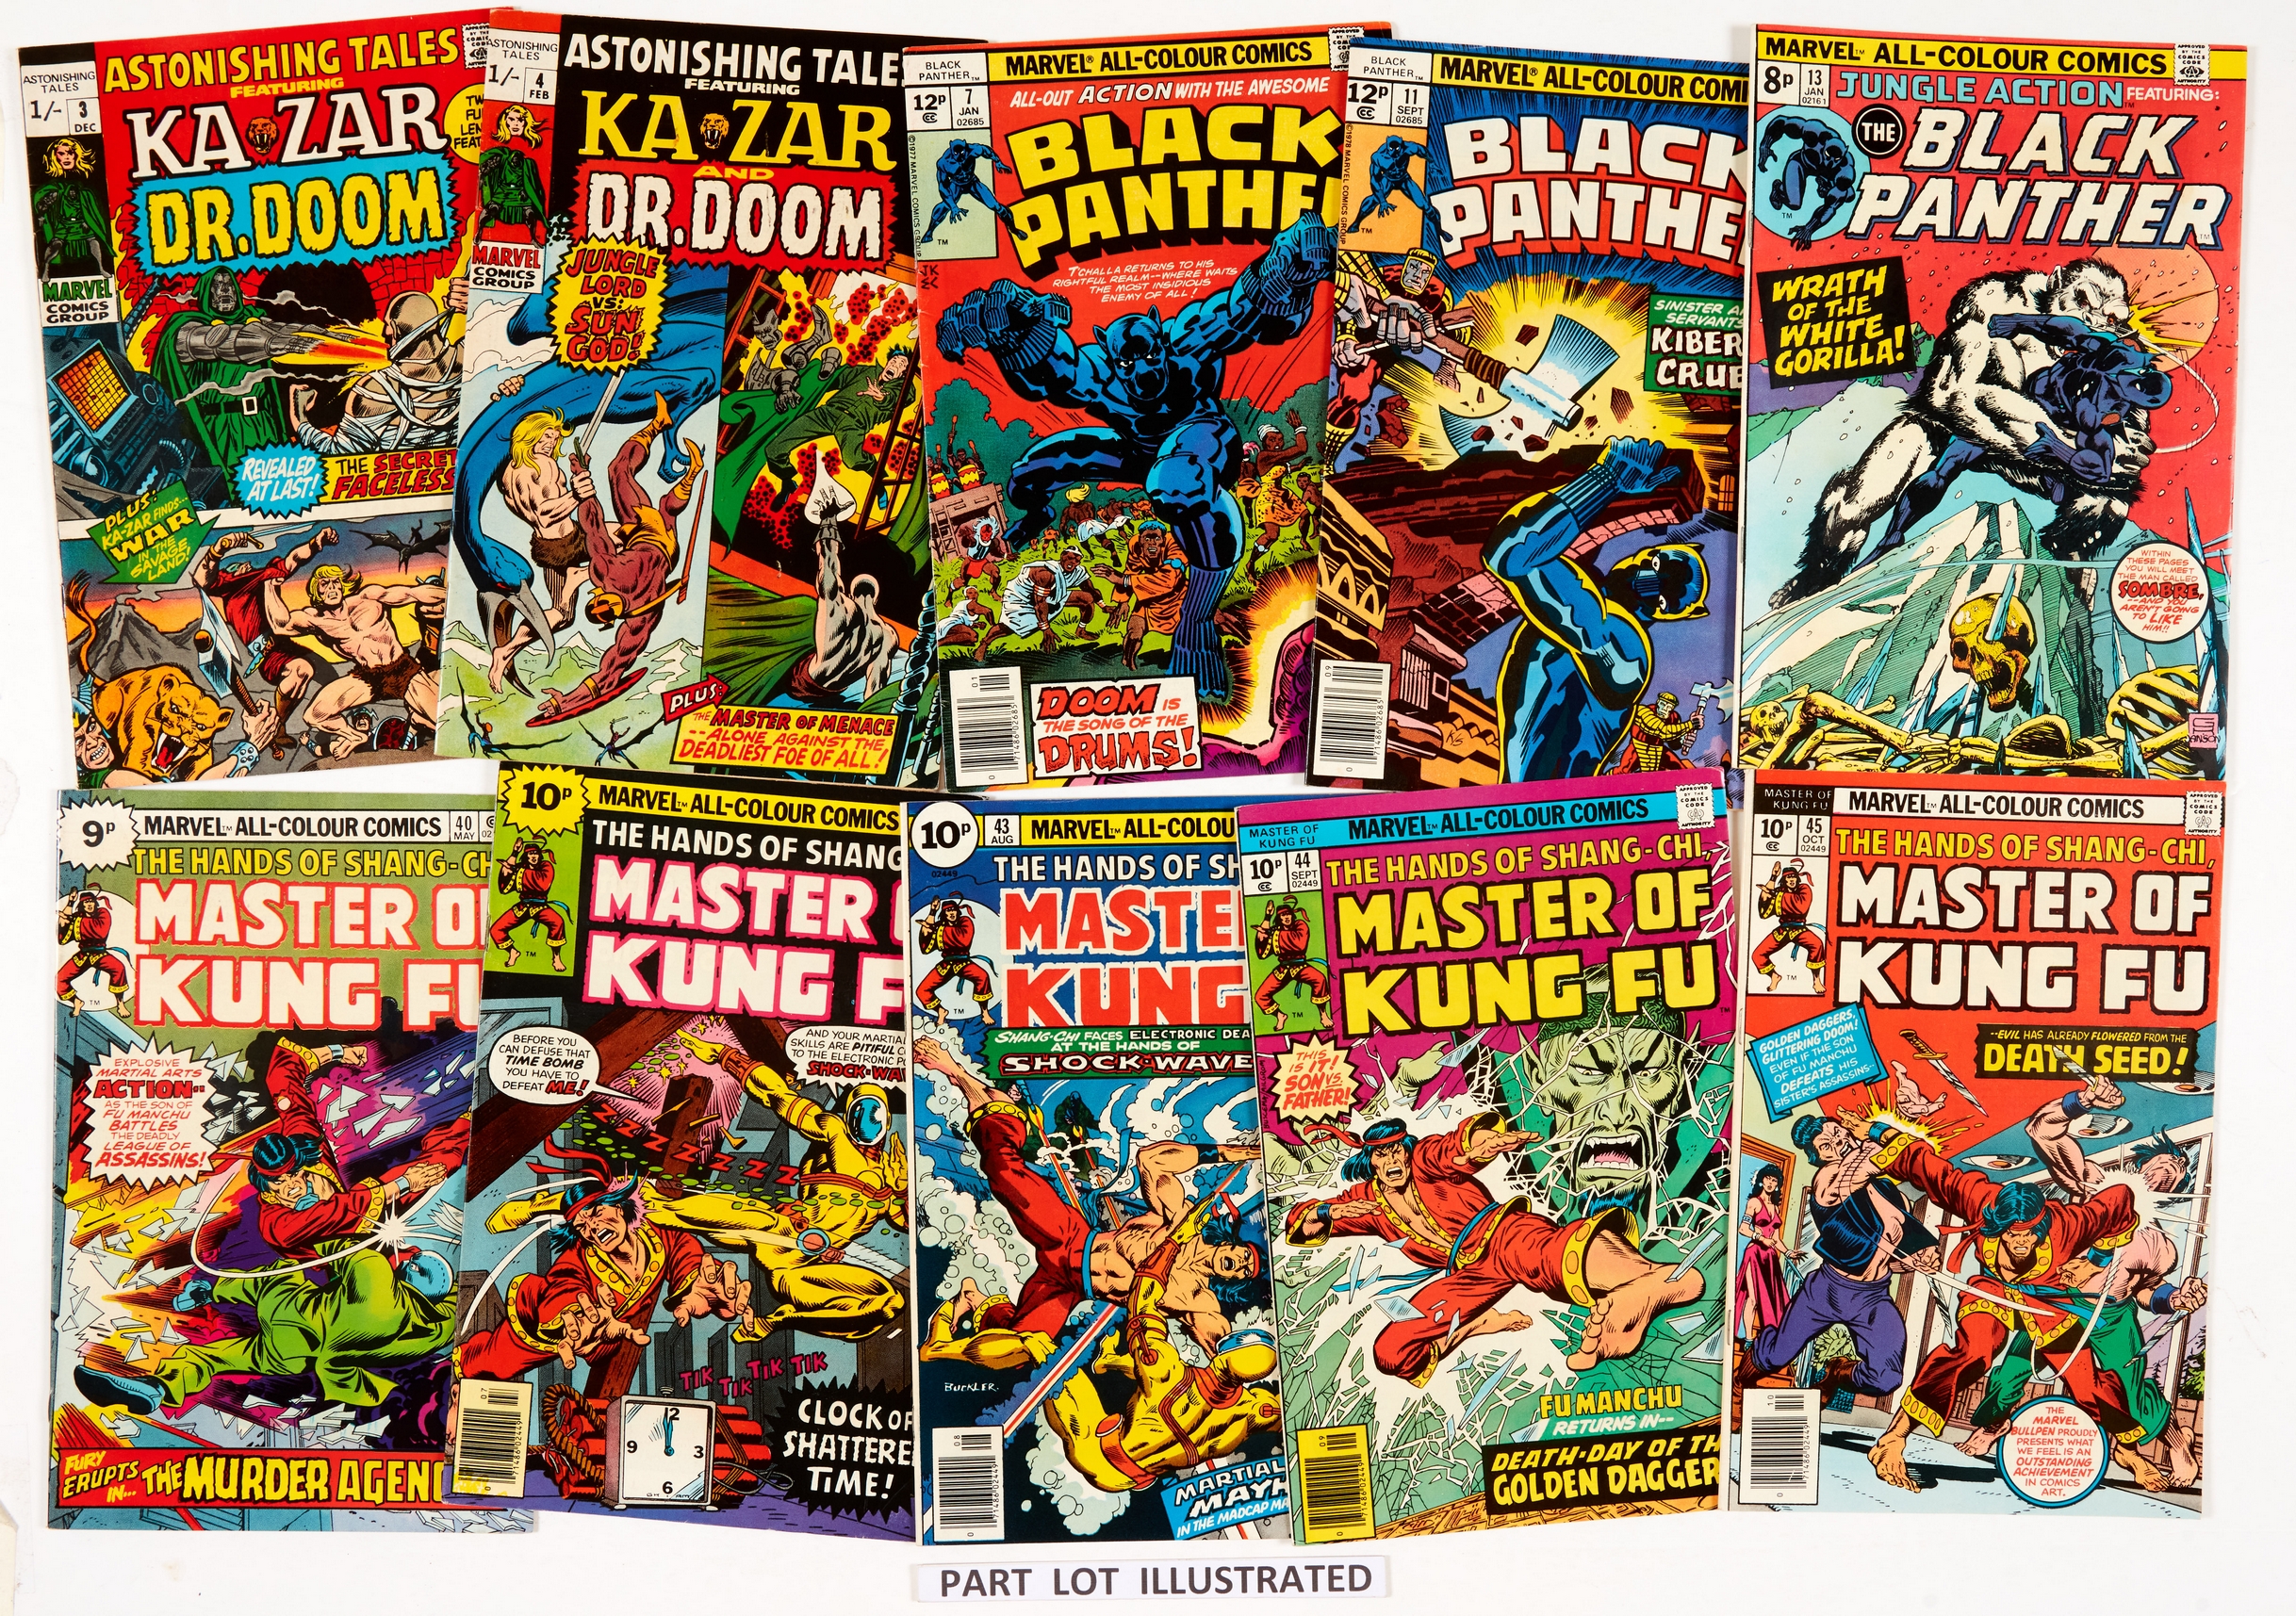 Astonishing Tales (1970) 3, 4, Black Panther 7, 11, Jungle Action & Black Panther 13, Master of